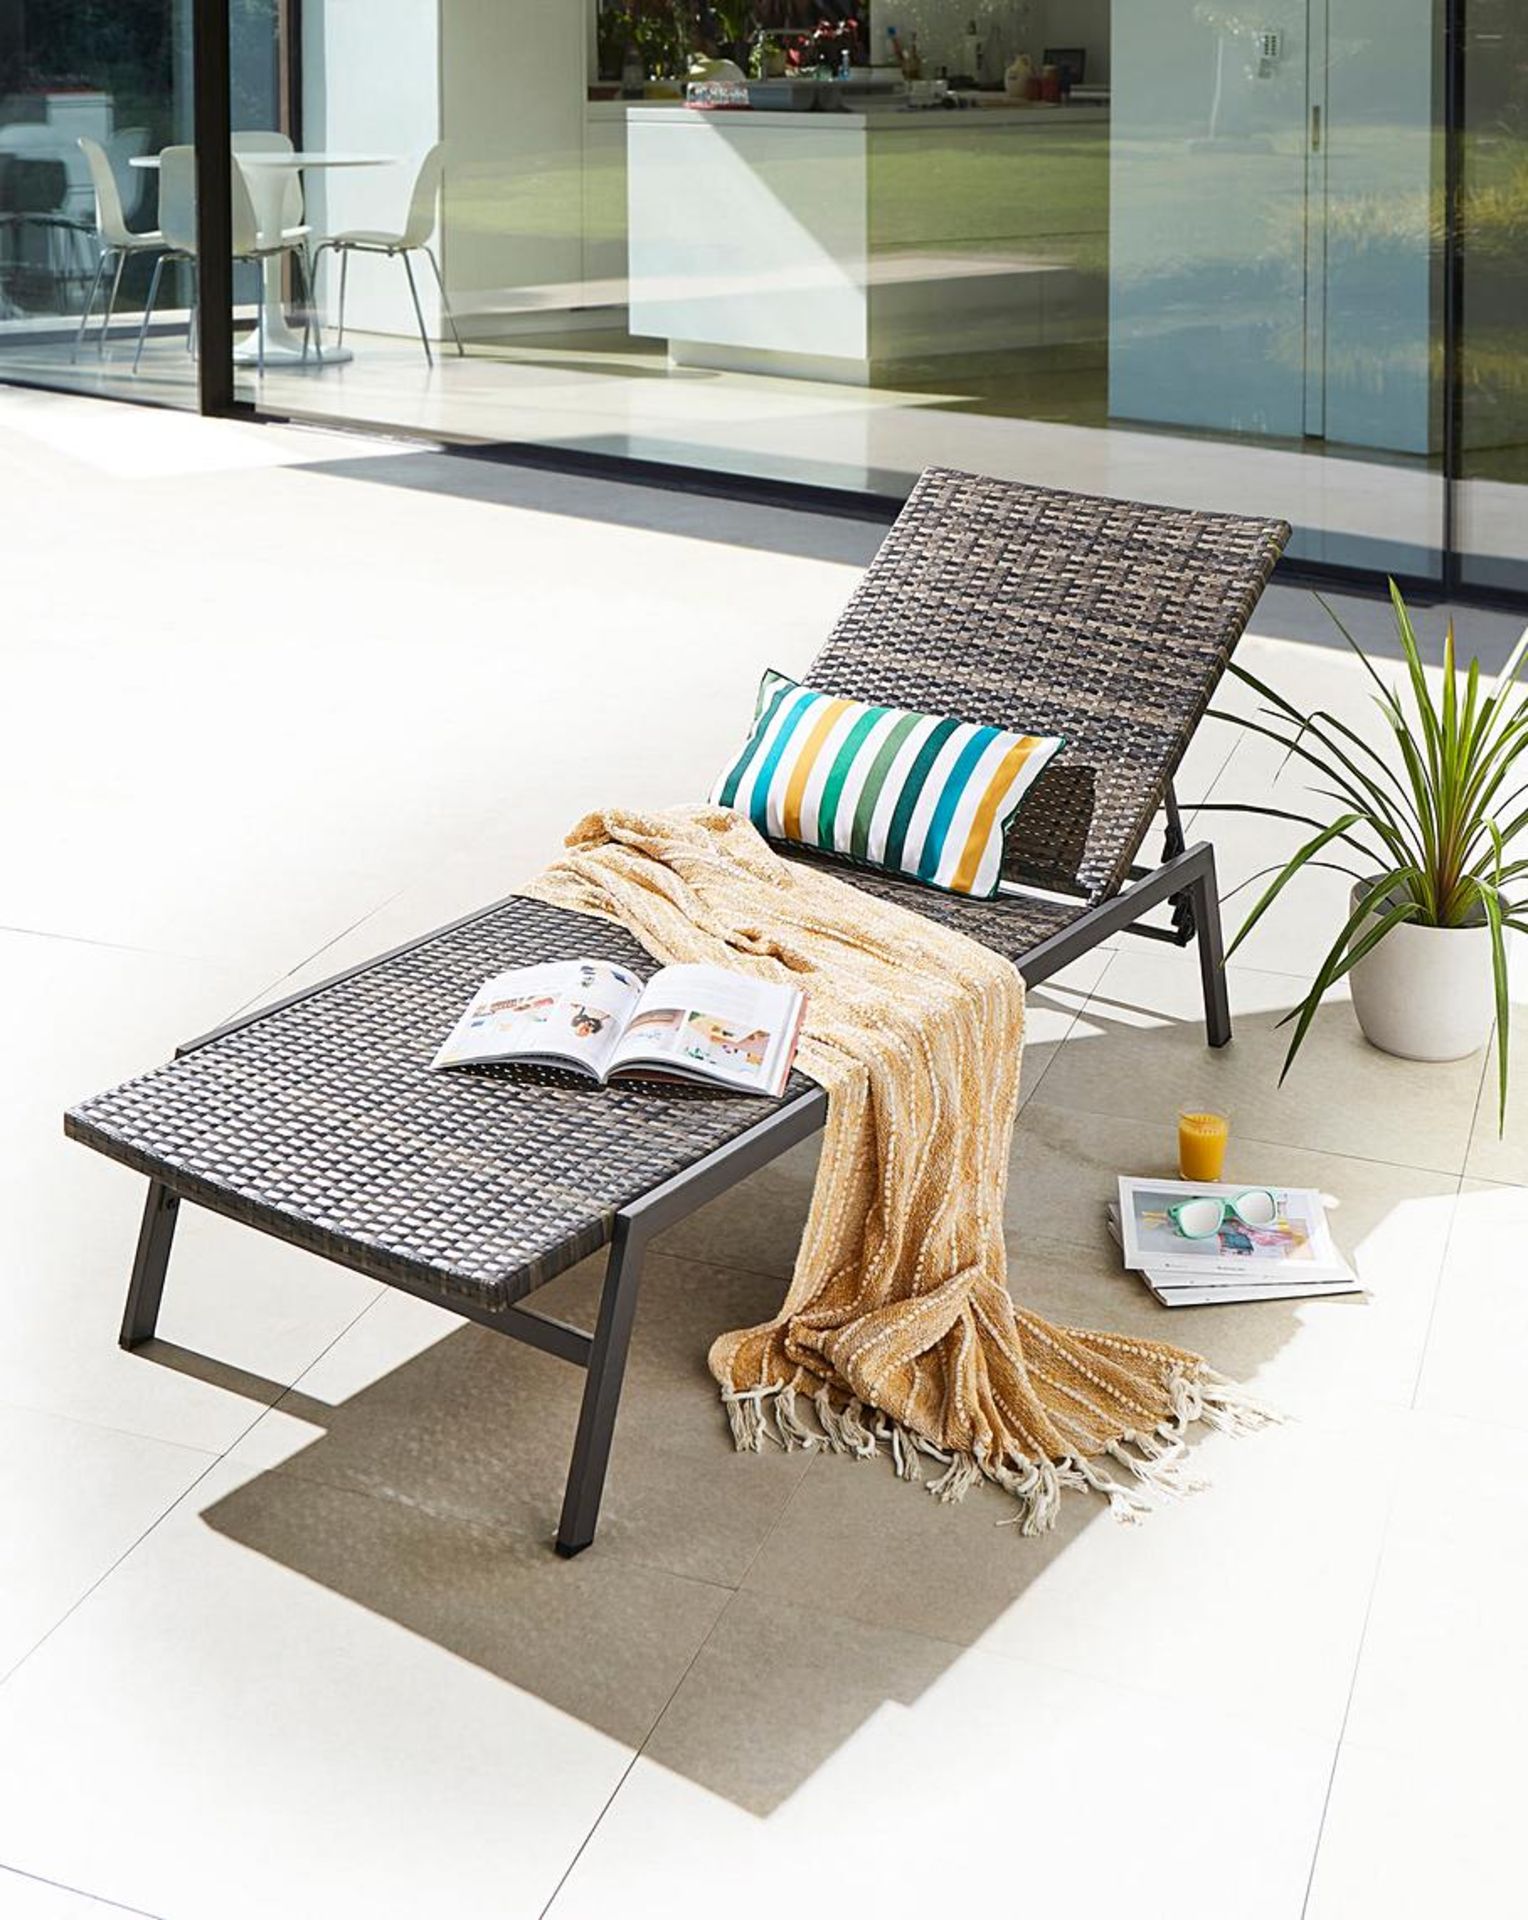 Cadiz Lounger. - SR5. RRP £249.00. The Cadiz lounger is a practical choice. Durable and weather